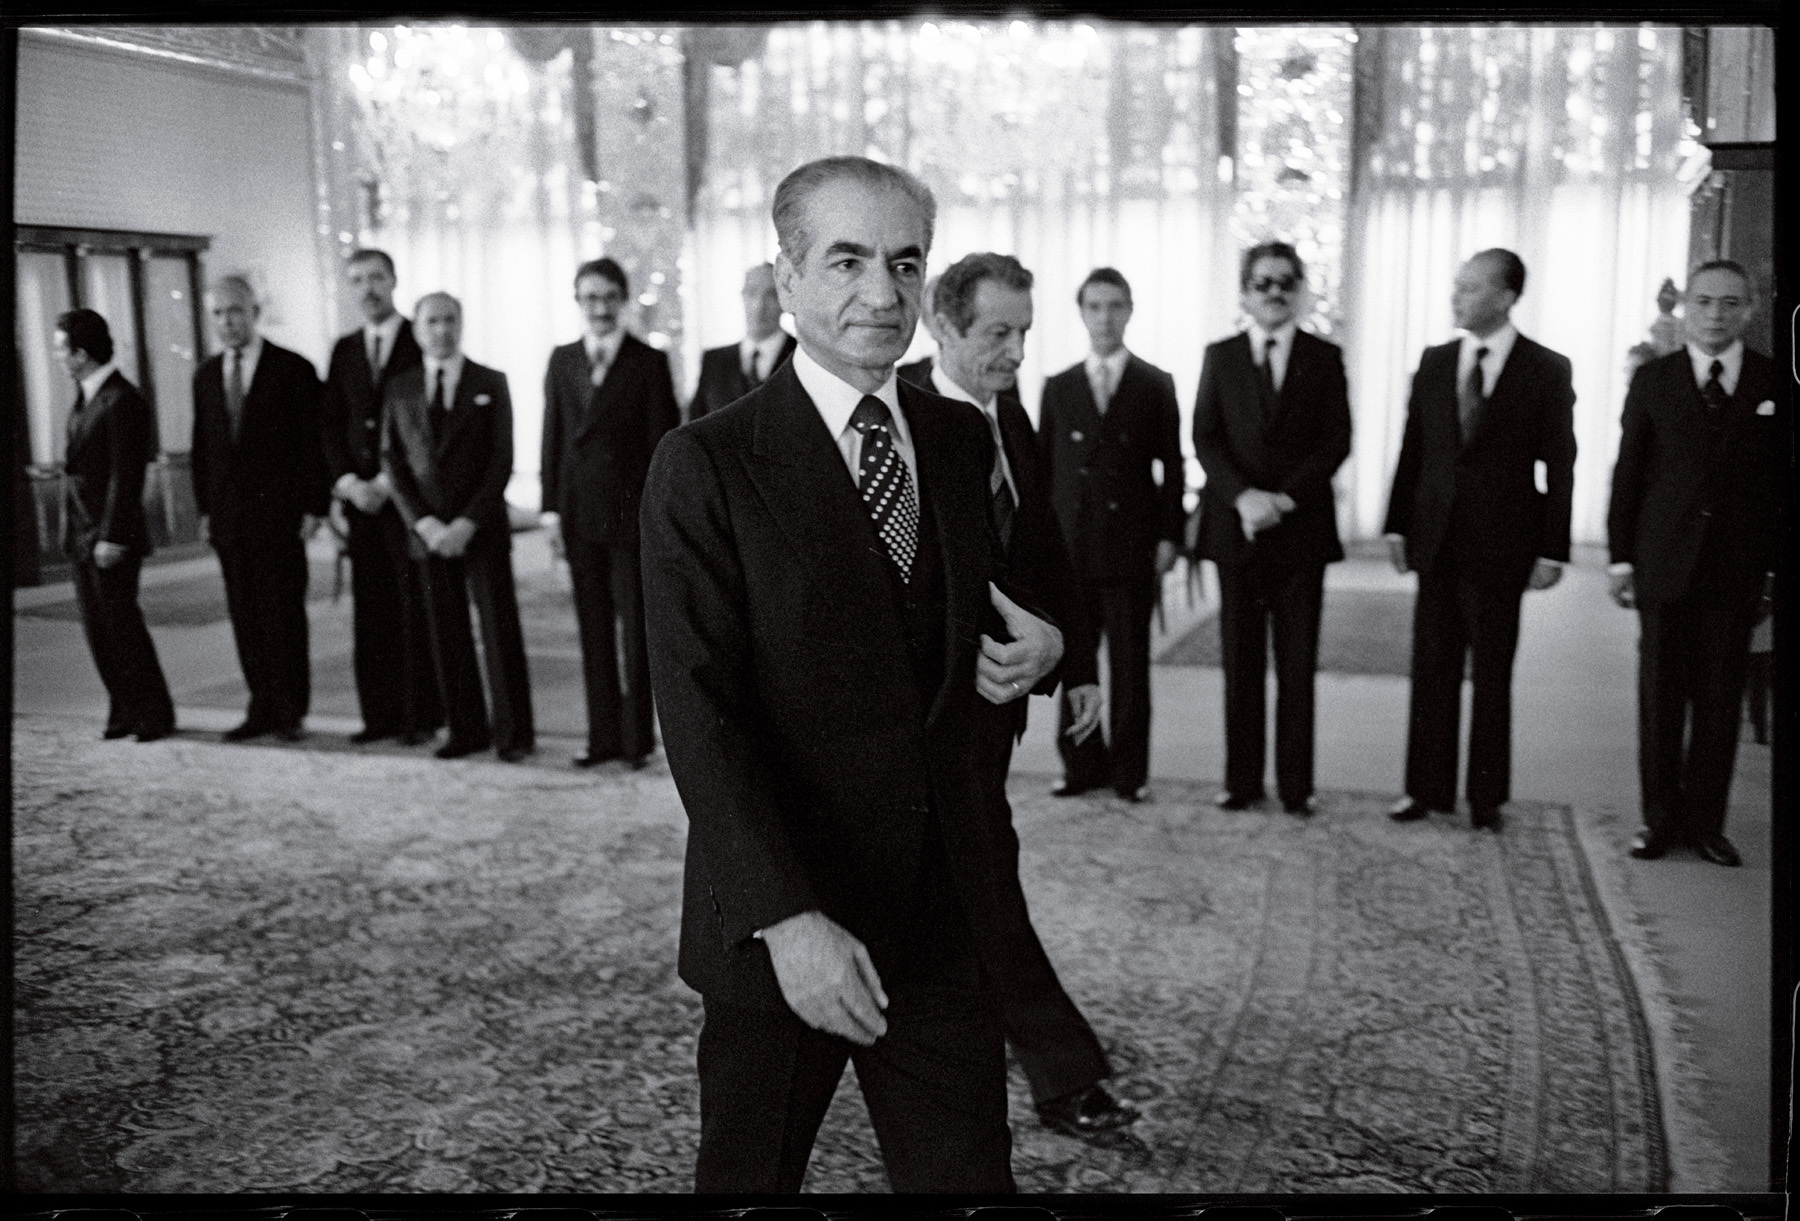 In early January, 1979, the Shah presents, for the last time, a governmental cabinet. : 44 Days: the Iranian Revolution : David Burnett | Photographer